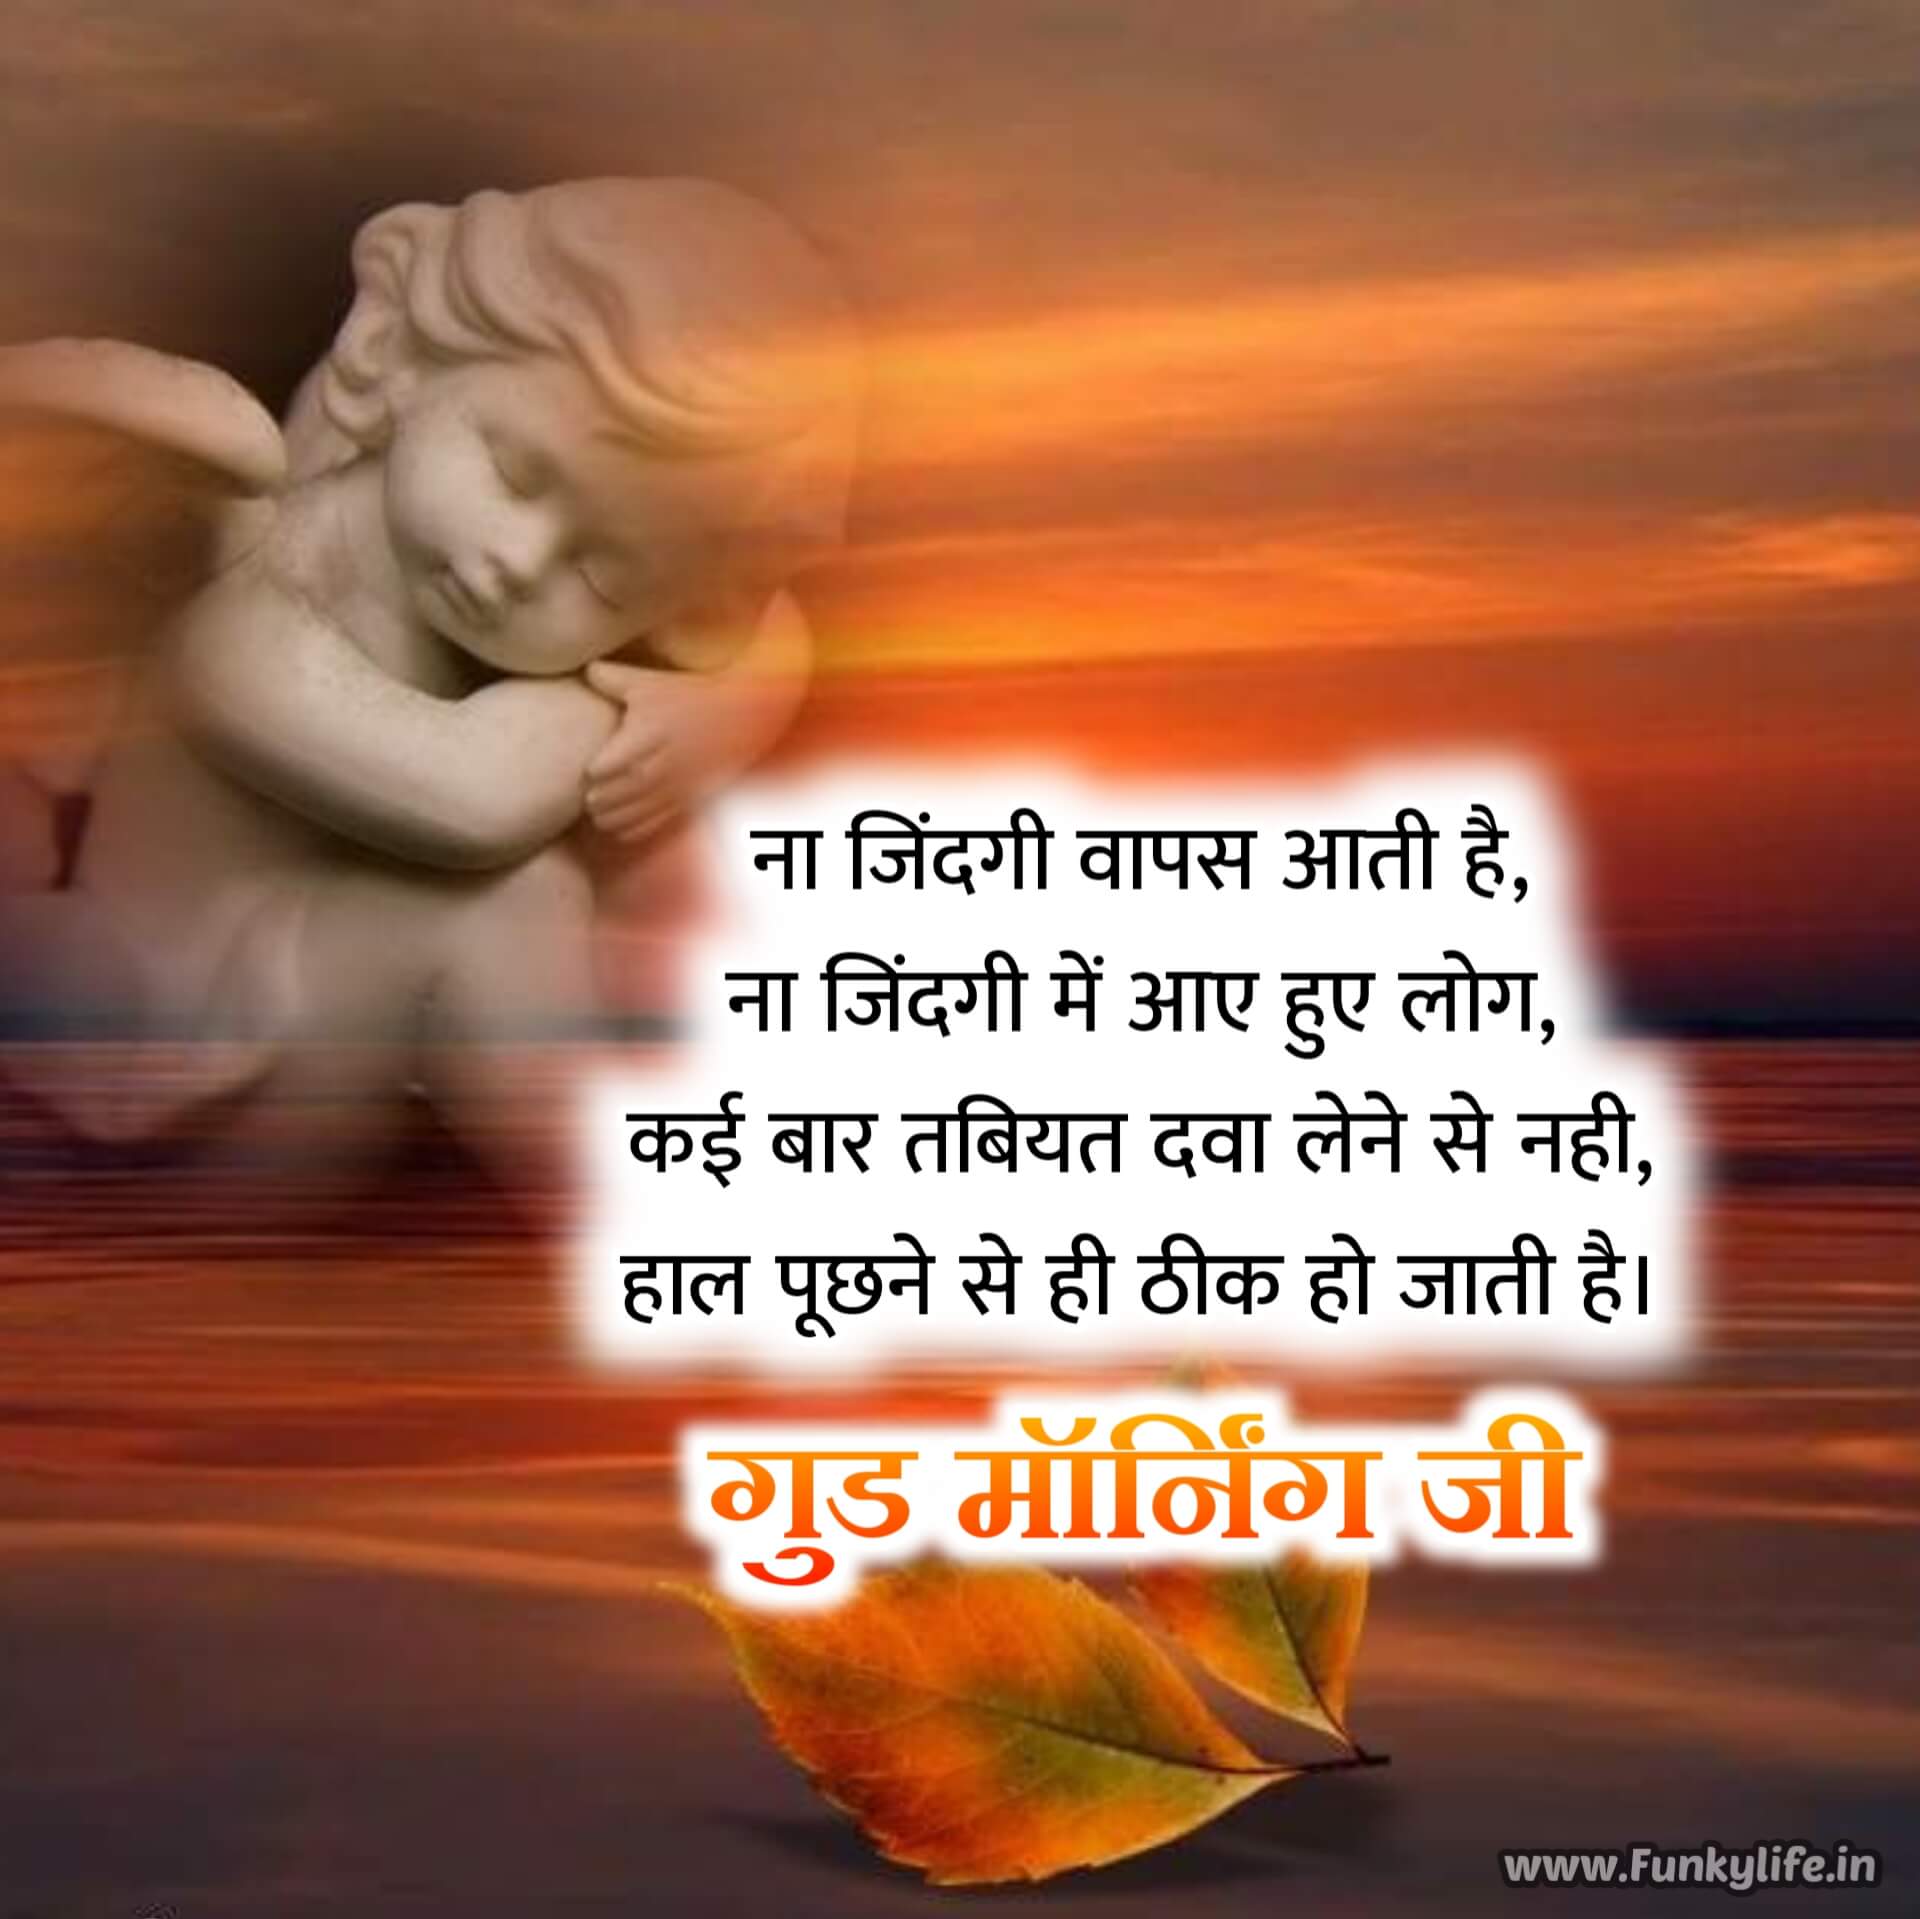 Good Morning Quotes in Hindi about life